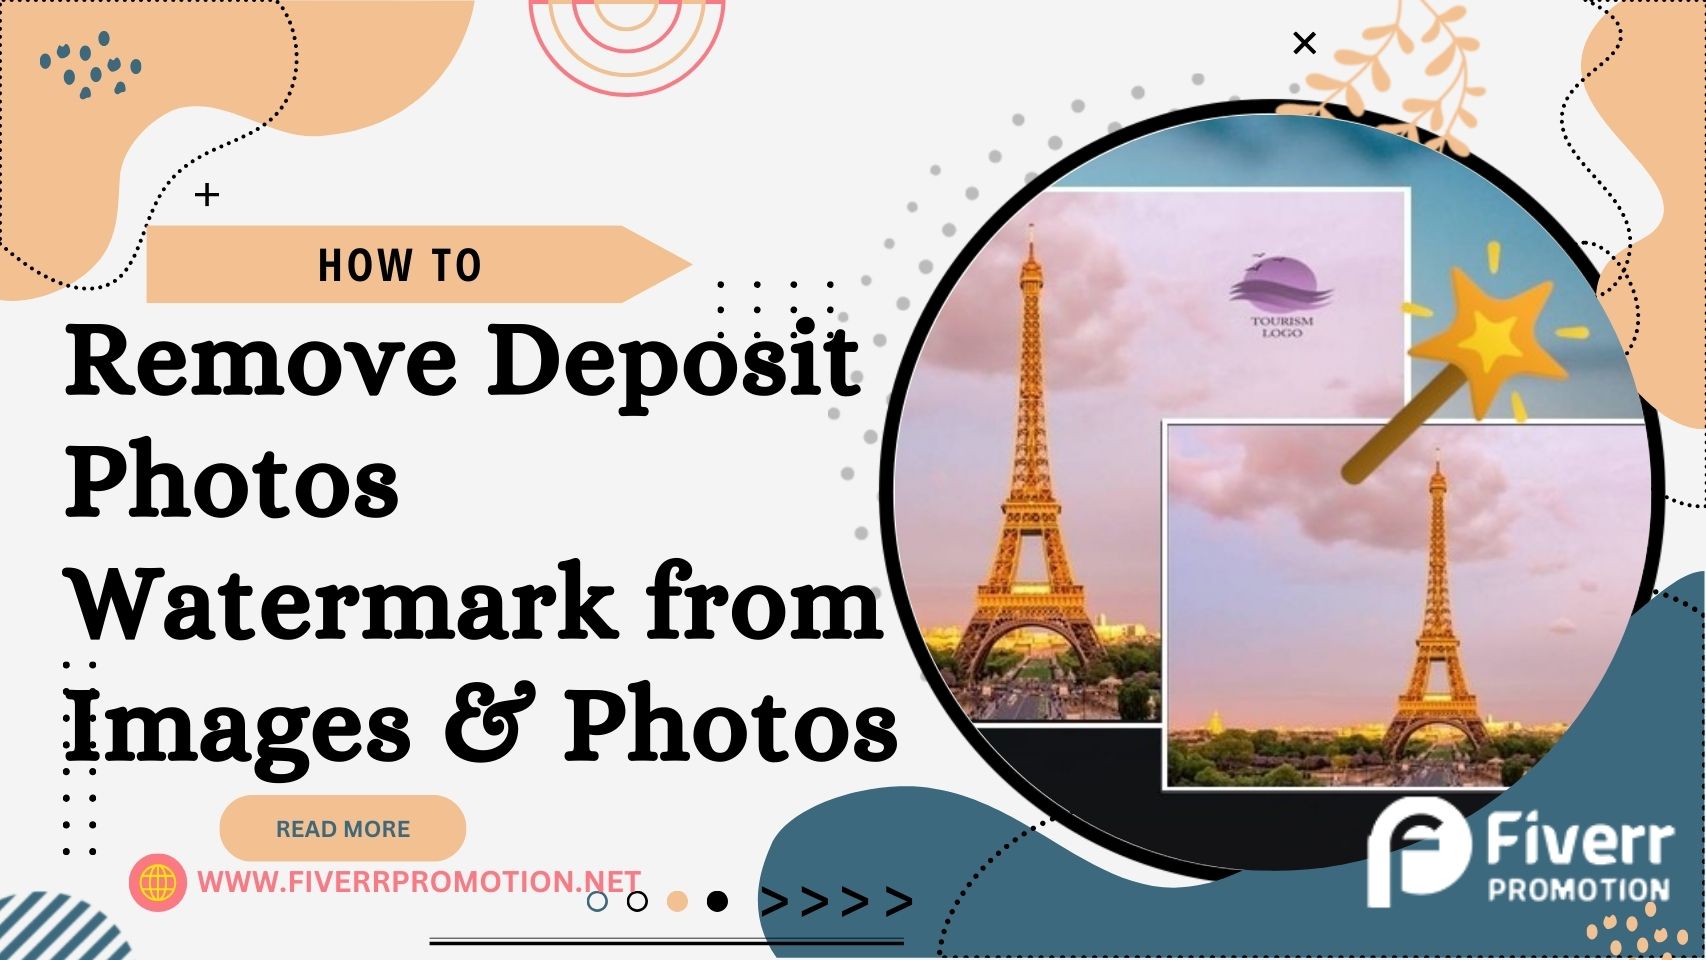 How to Remove Deposit Photos Watermark from Images & Photos